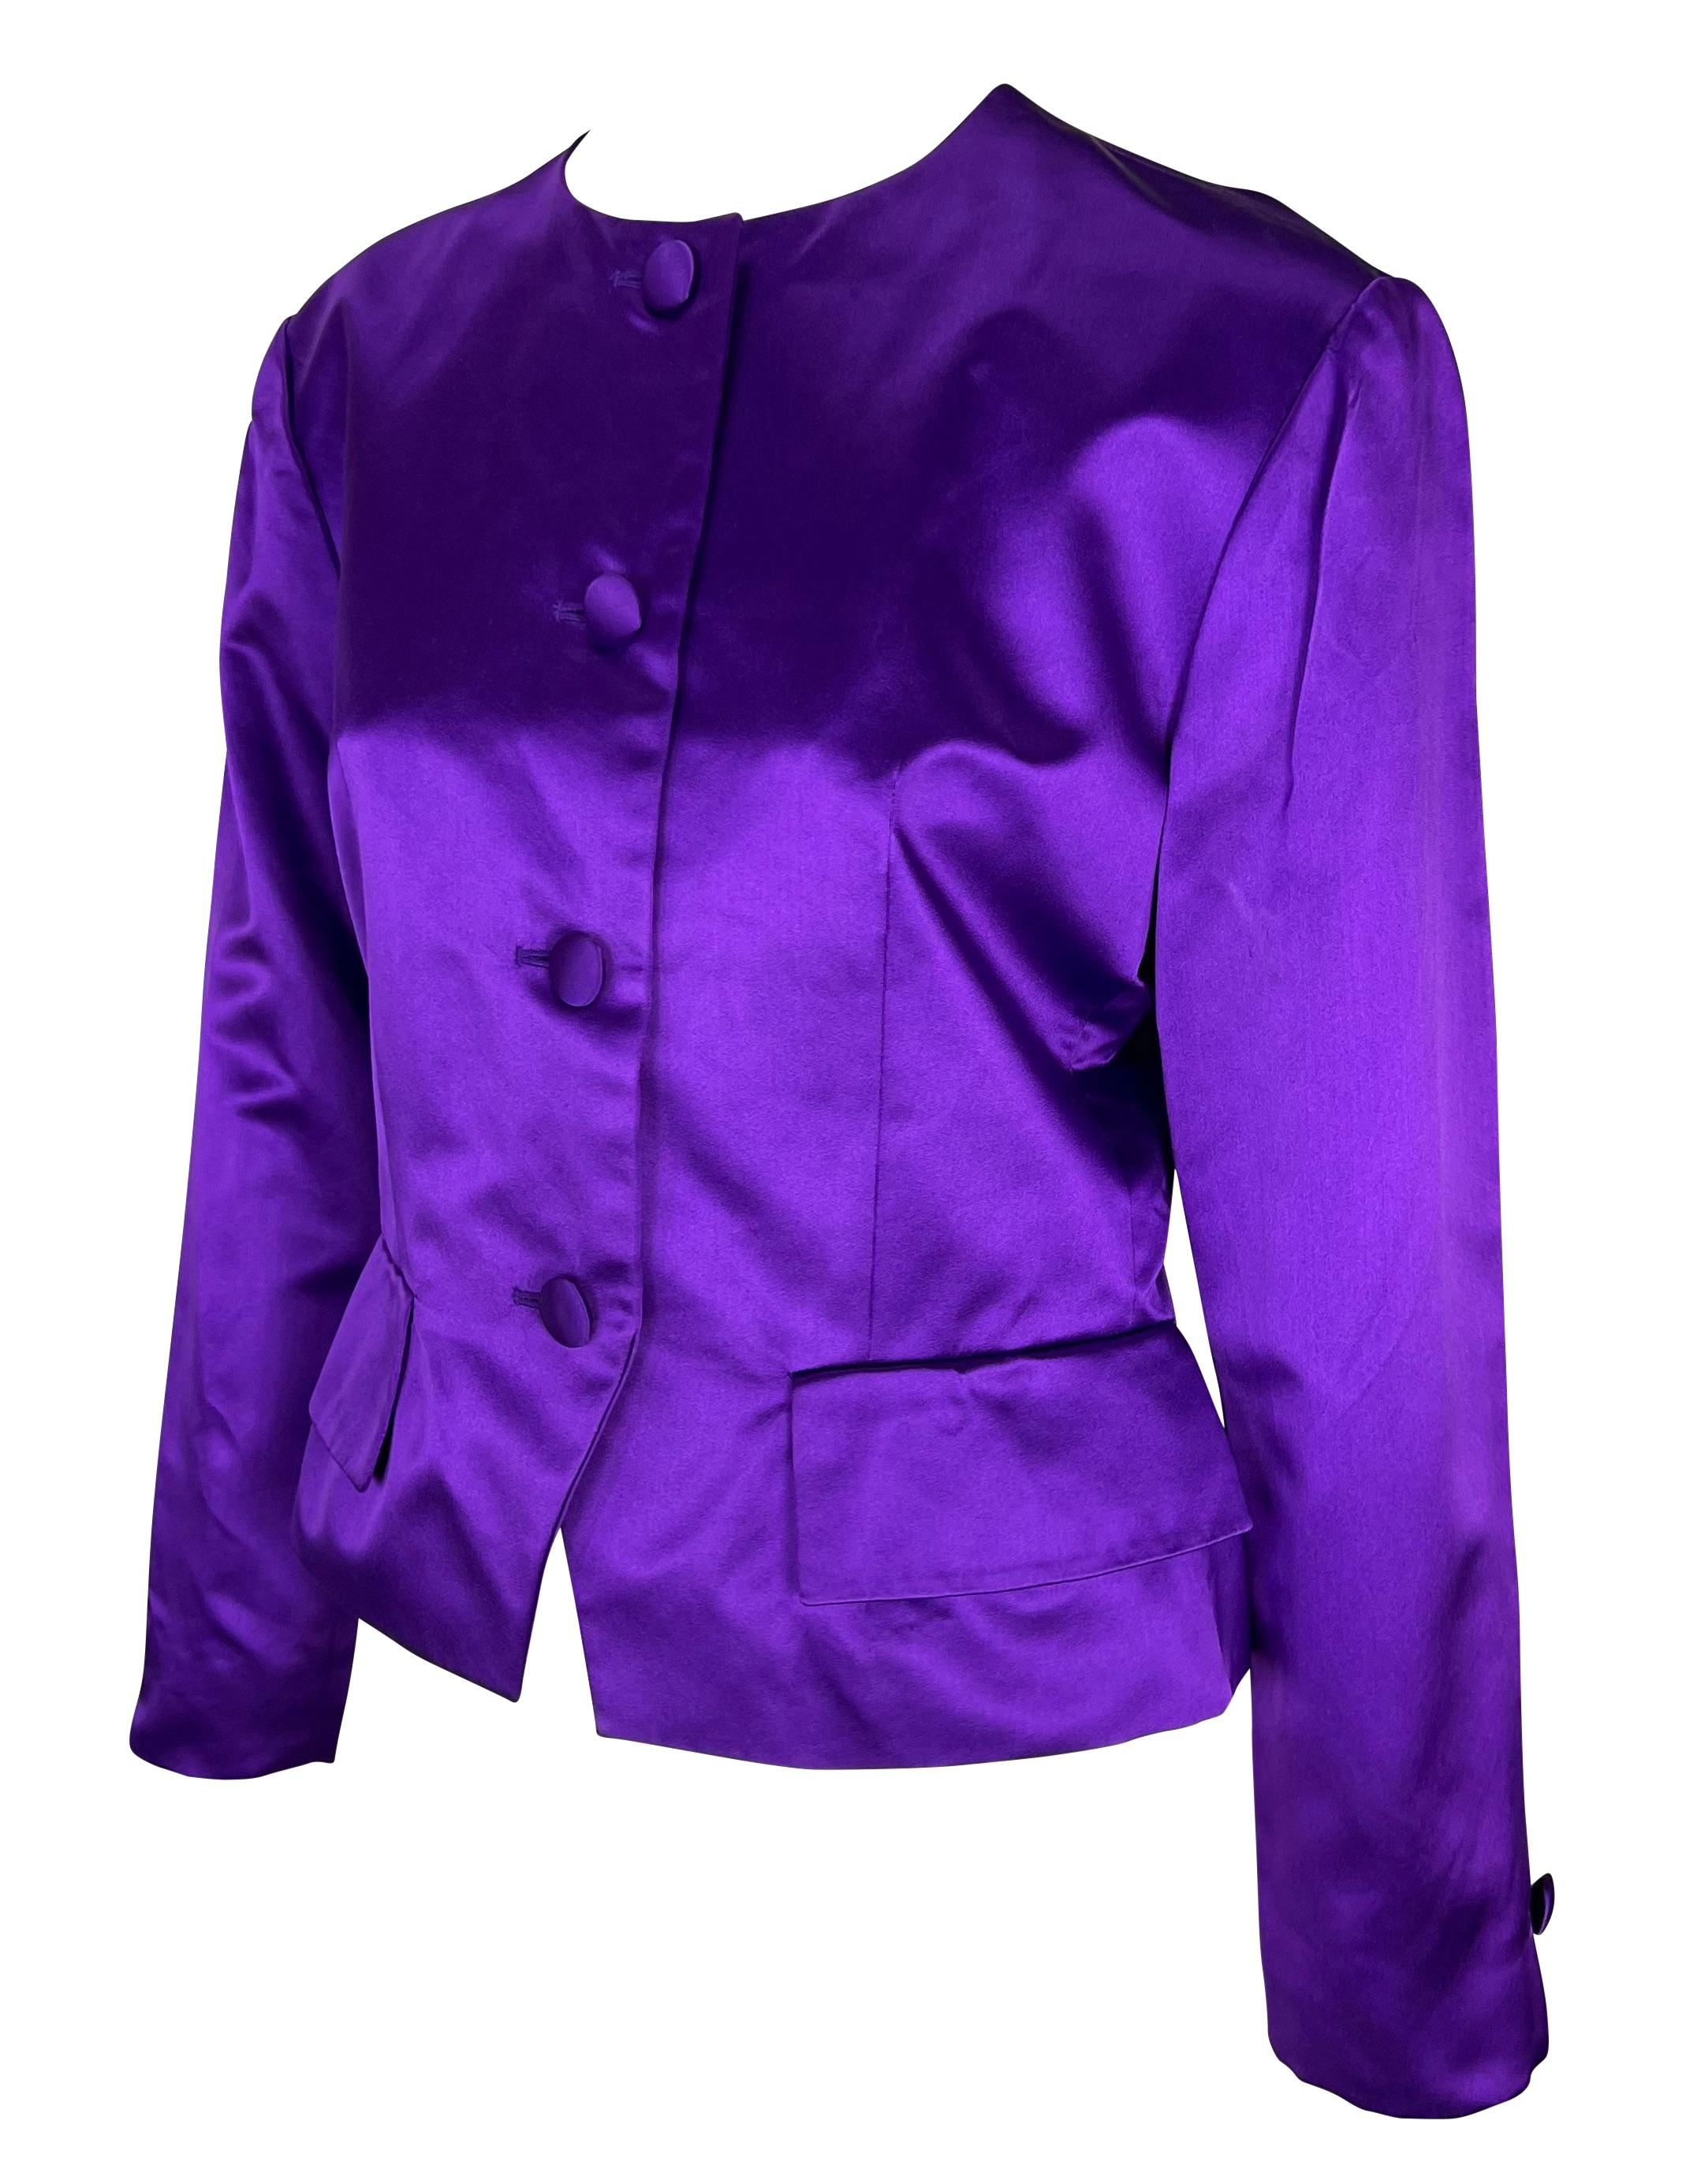 Presenting a beautiful deep purple silk satin Christian Dior Boutique jacket, designed by Gianfranco Ferré. From the early 1990s, this entirely silk satin jacket features a crew neckline, button-down closures, and pockets at the hips. This luxurious